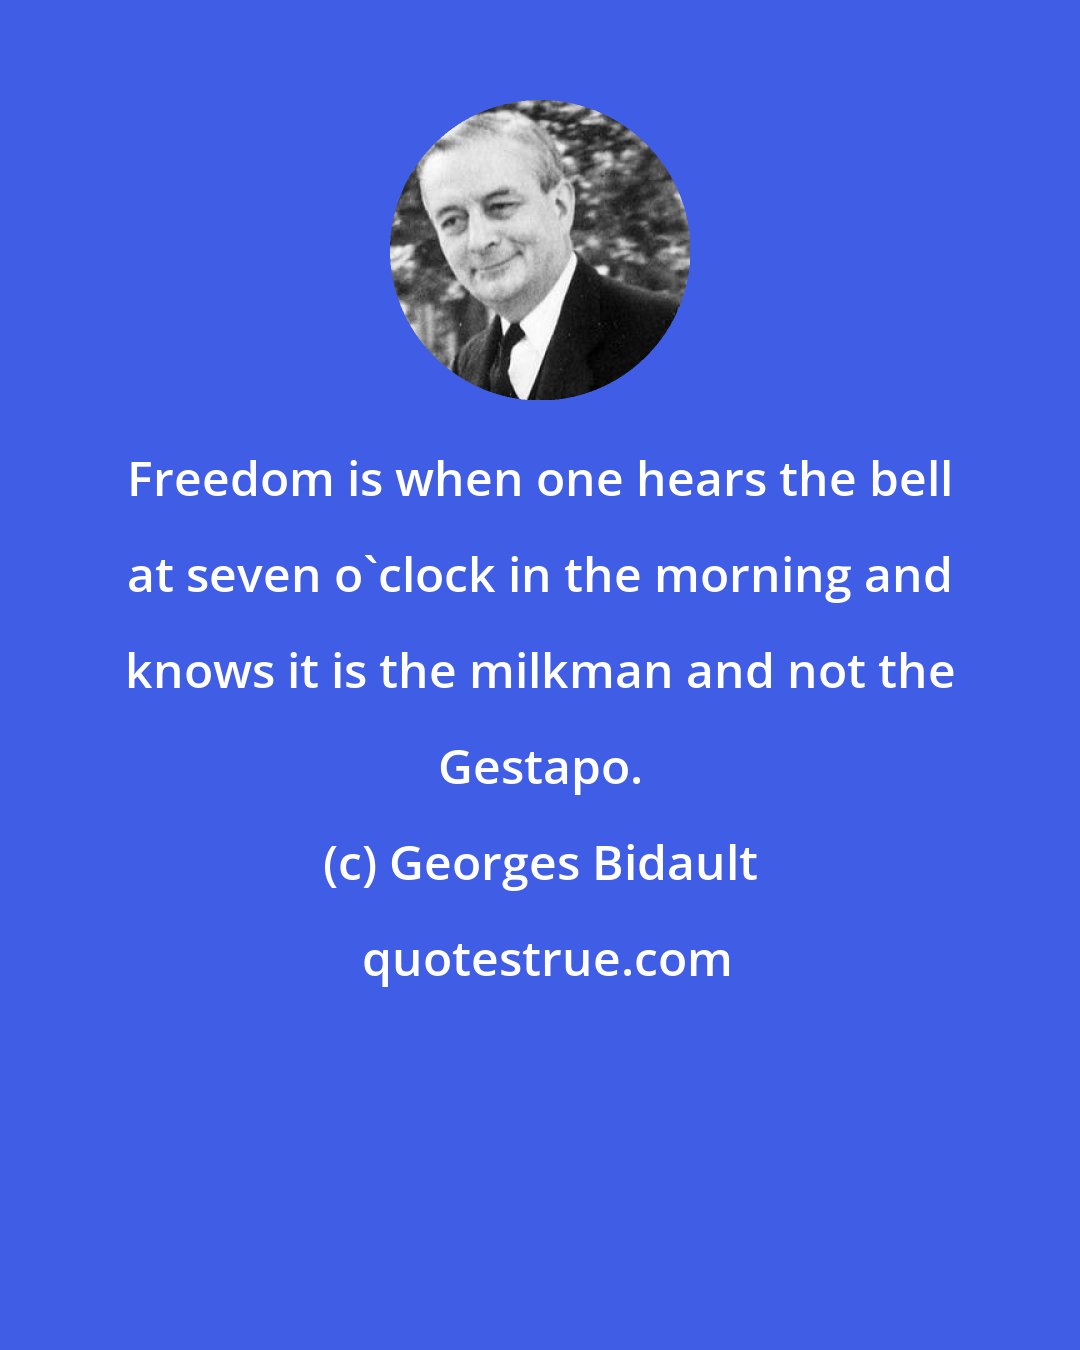 Georges Bidault: Freedom is when one hears the bell at seven o'clock in the morning and knows it is the milkman and not the Gestapo.